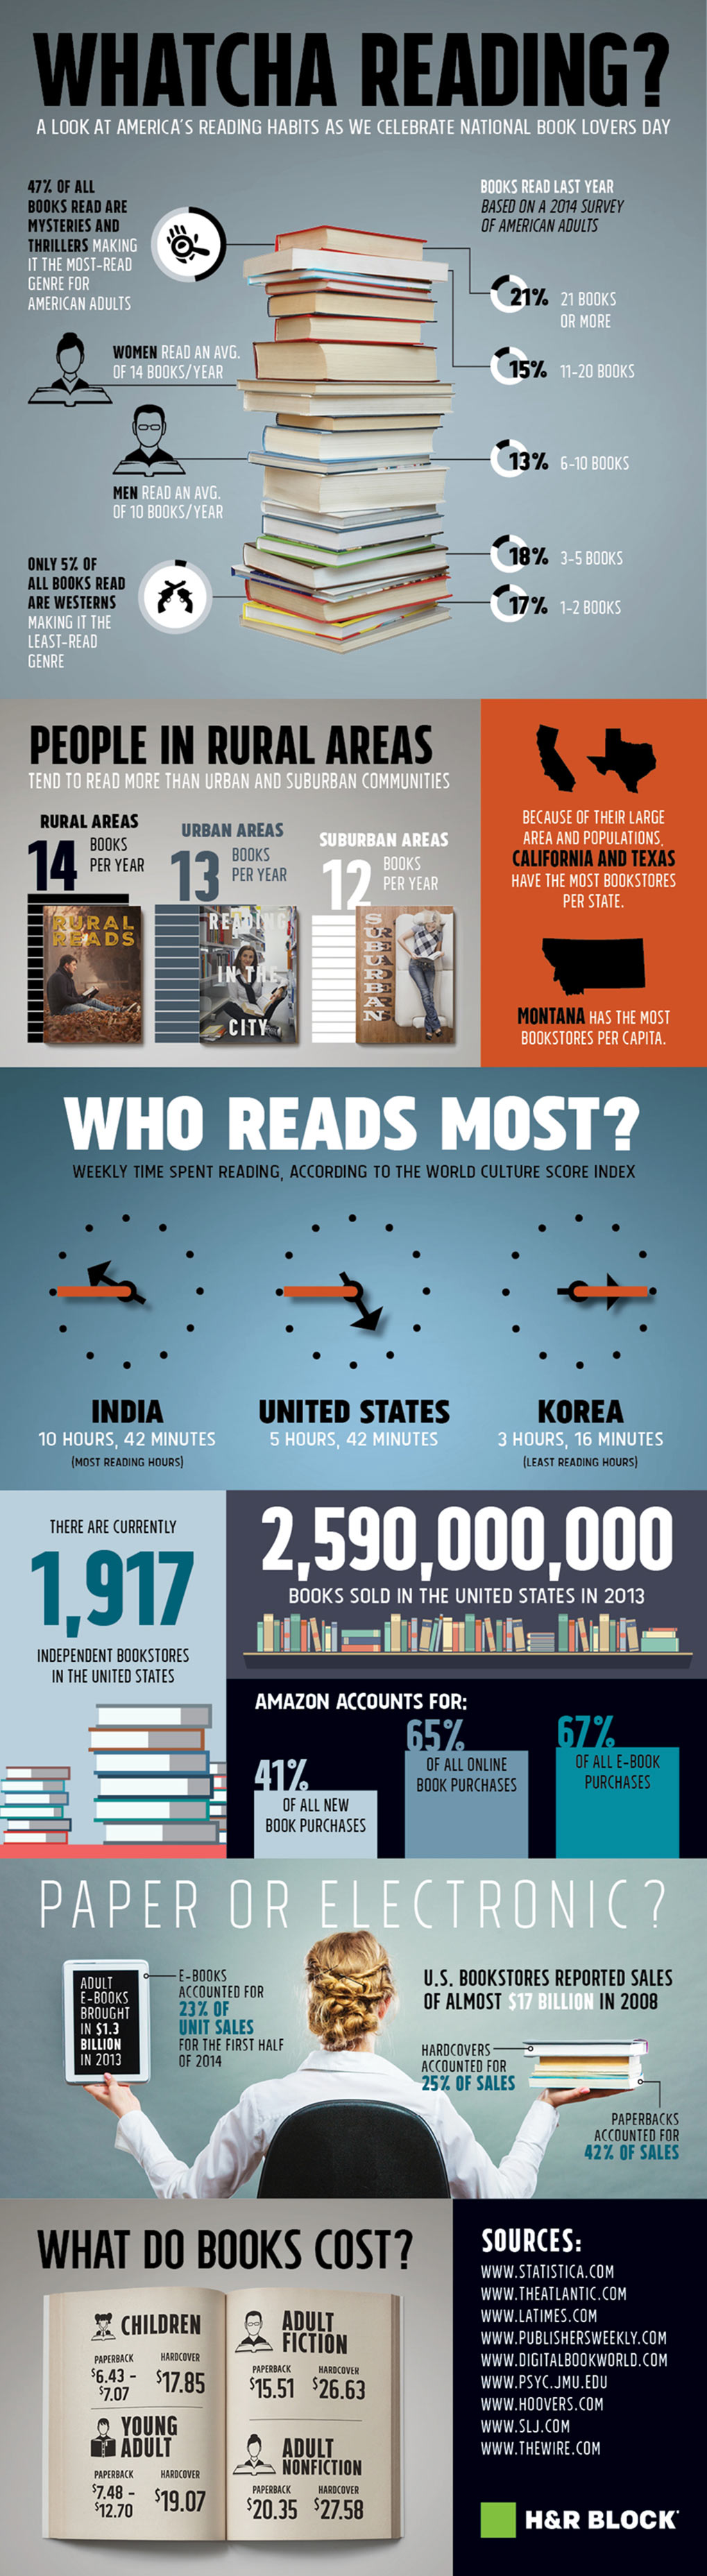 Whatcha Reading A Look At America's Reading Habits - Infographic